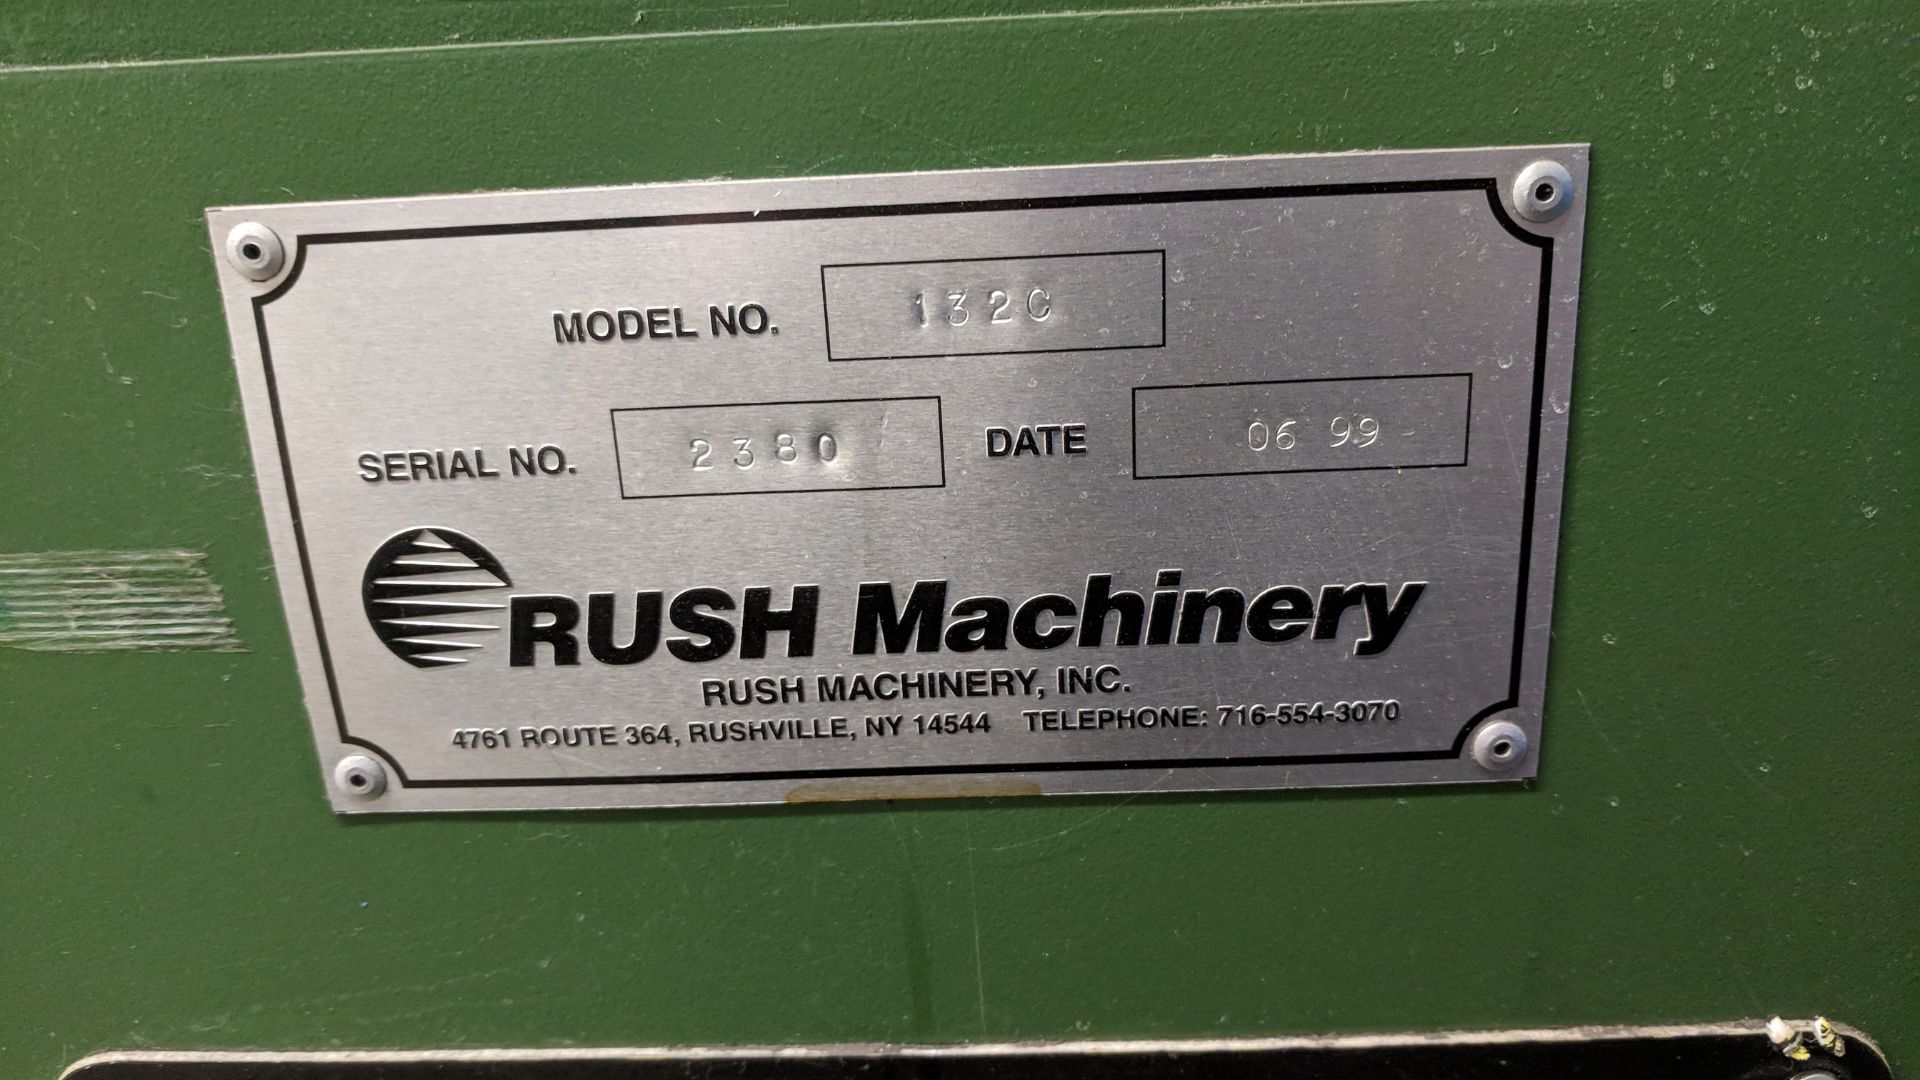 RUSH MACHINERY (1999) 132C TOOL AND CUTTER GRINDER WITH 0.80" TO 1.25" CAPACITY, S/N 2380 (CI) - Image 2 of 3